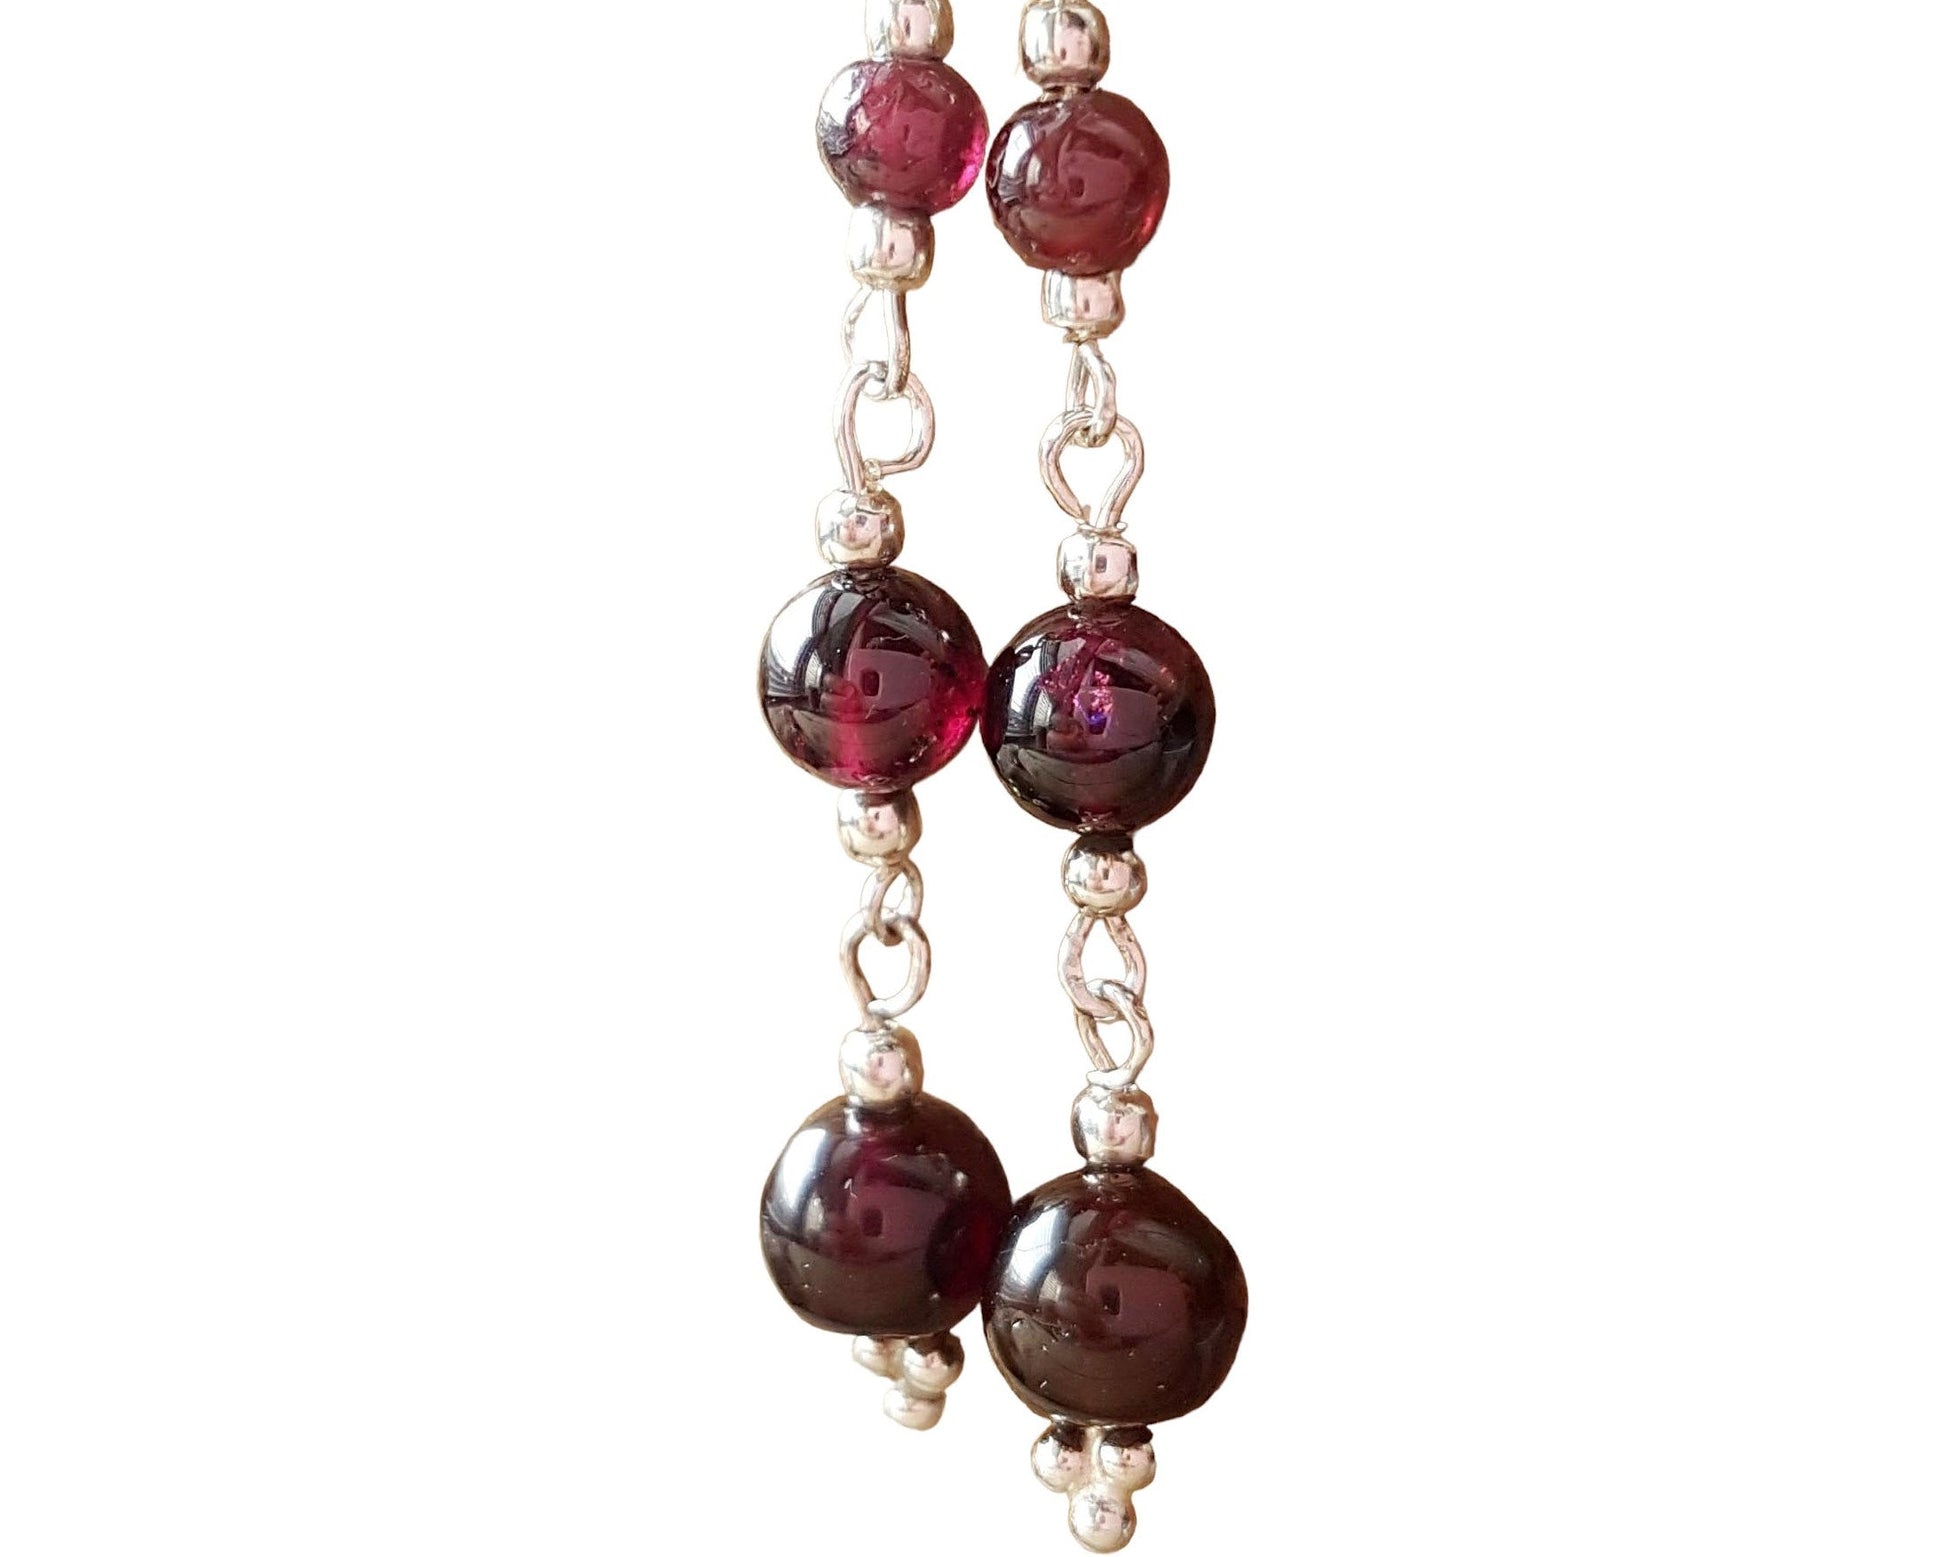 Long Garnet Passion Earrings-Three deep red stones earrings with Sterling Silver